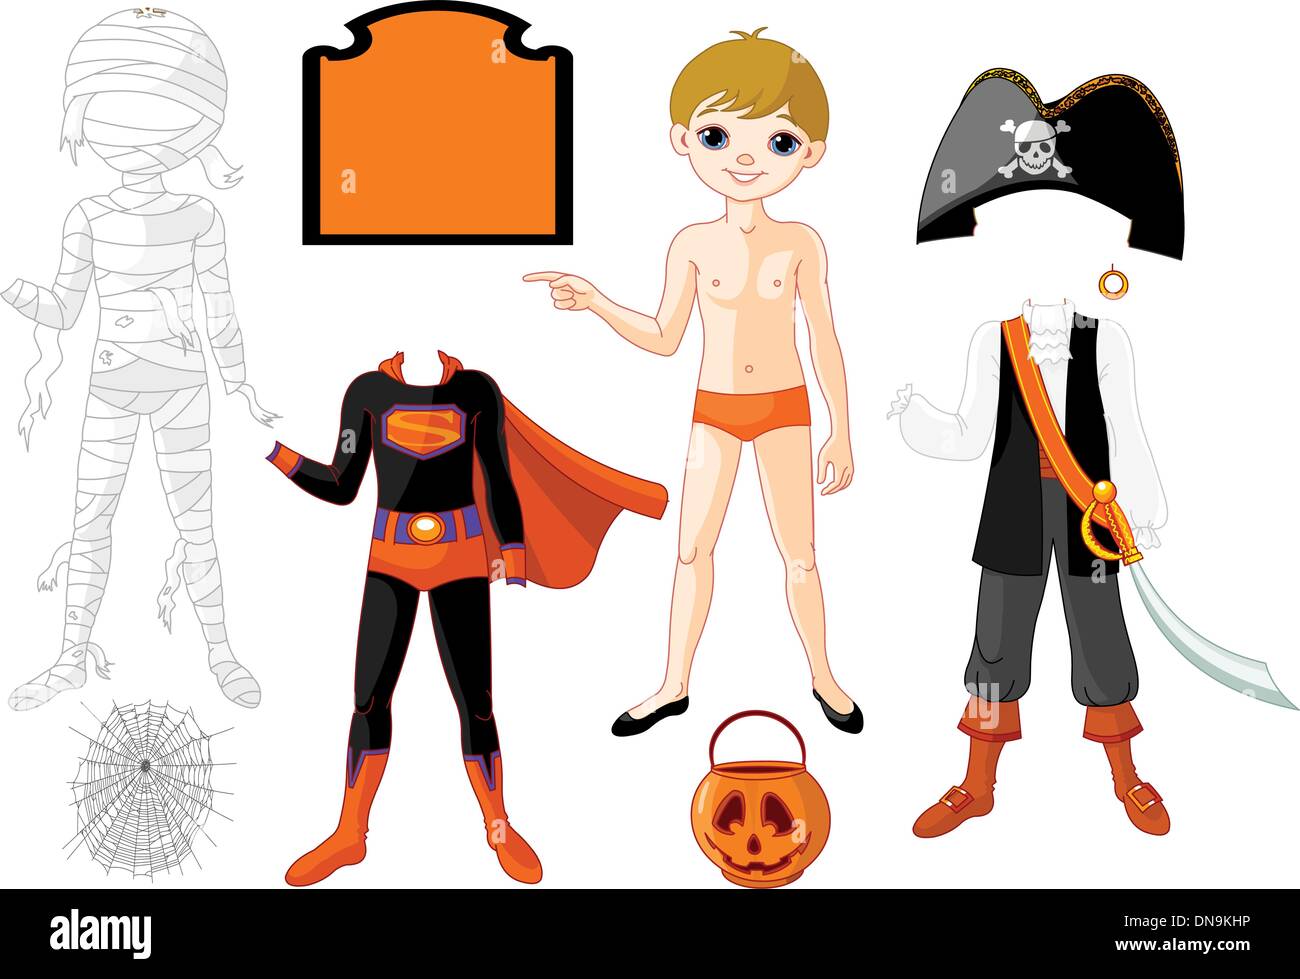 Boy with costume for Halloween Party Stock Vector